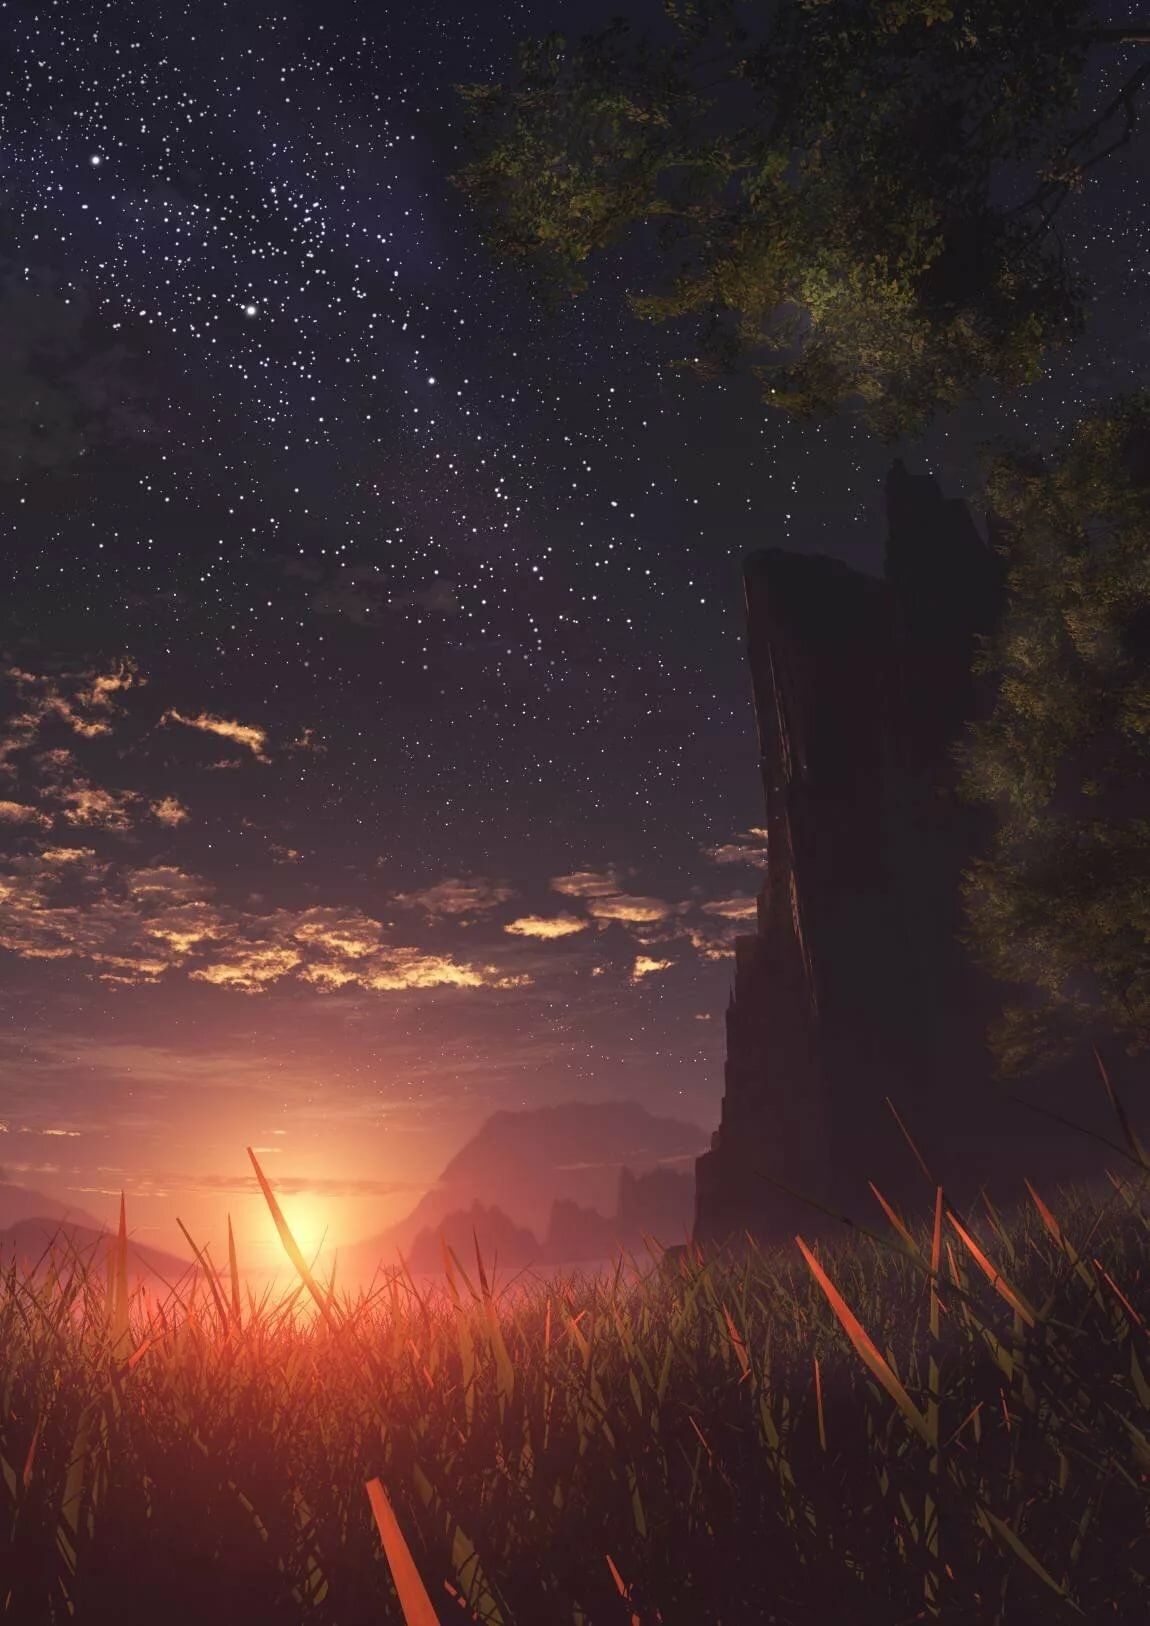 A sunset over a grassy field with a tree and a castle in the distance. - Anime sunset